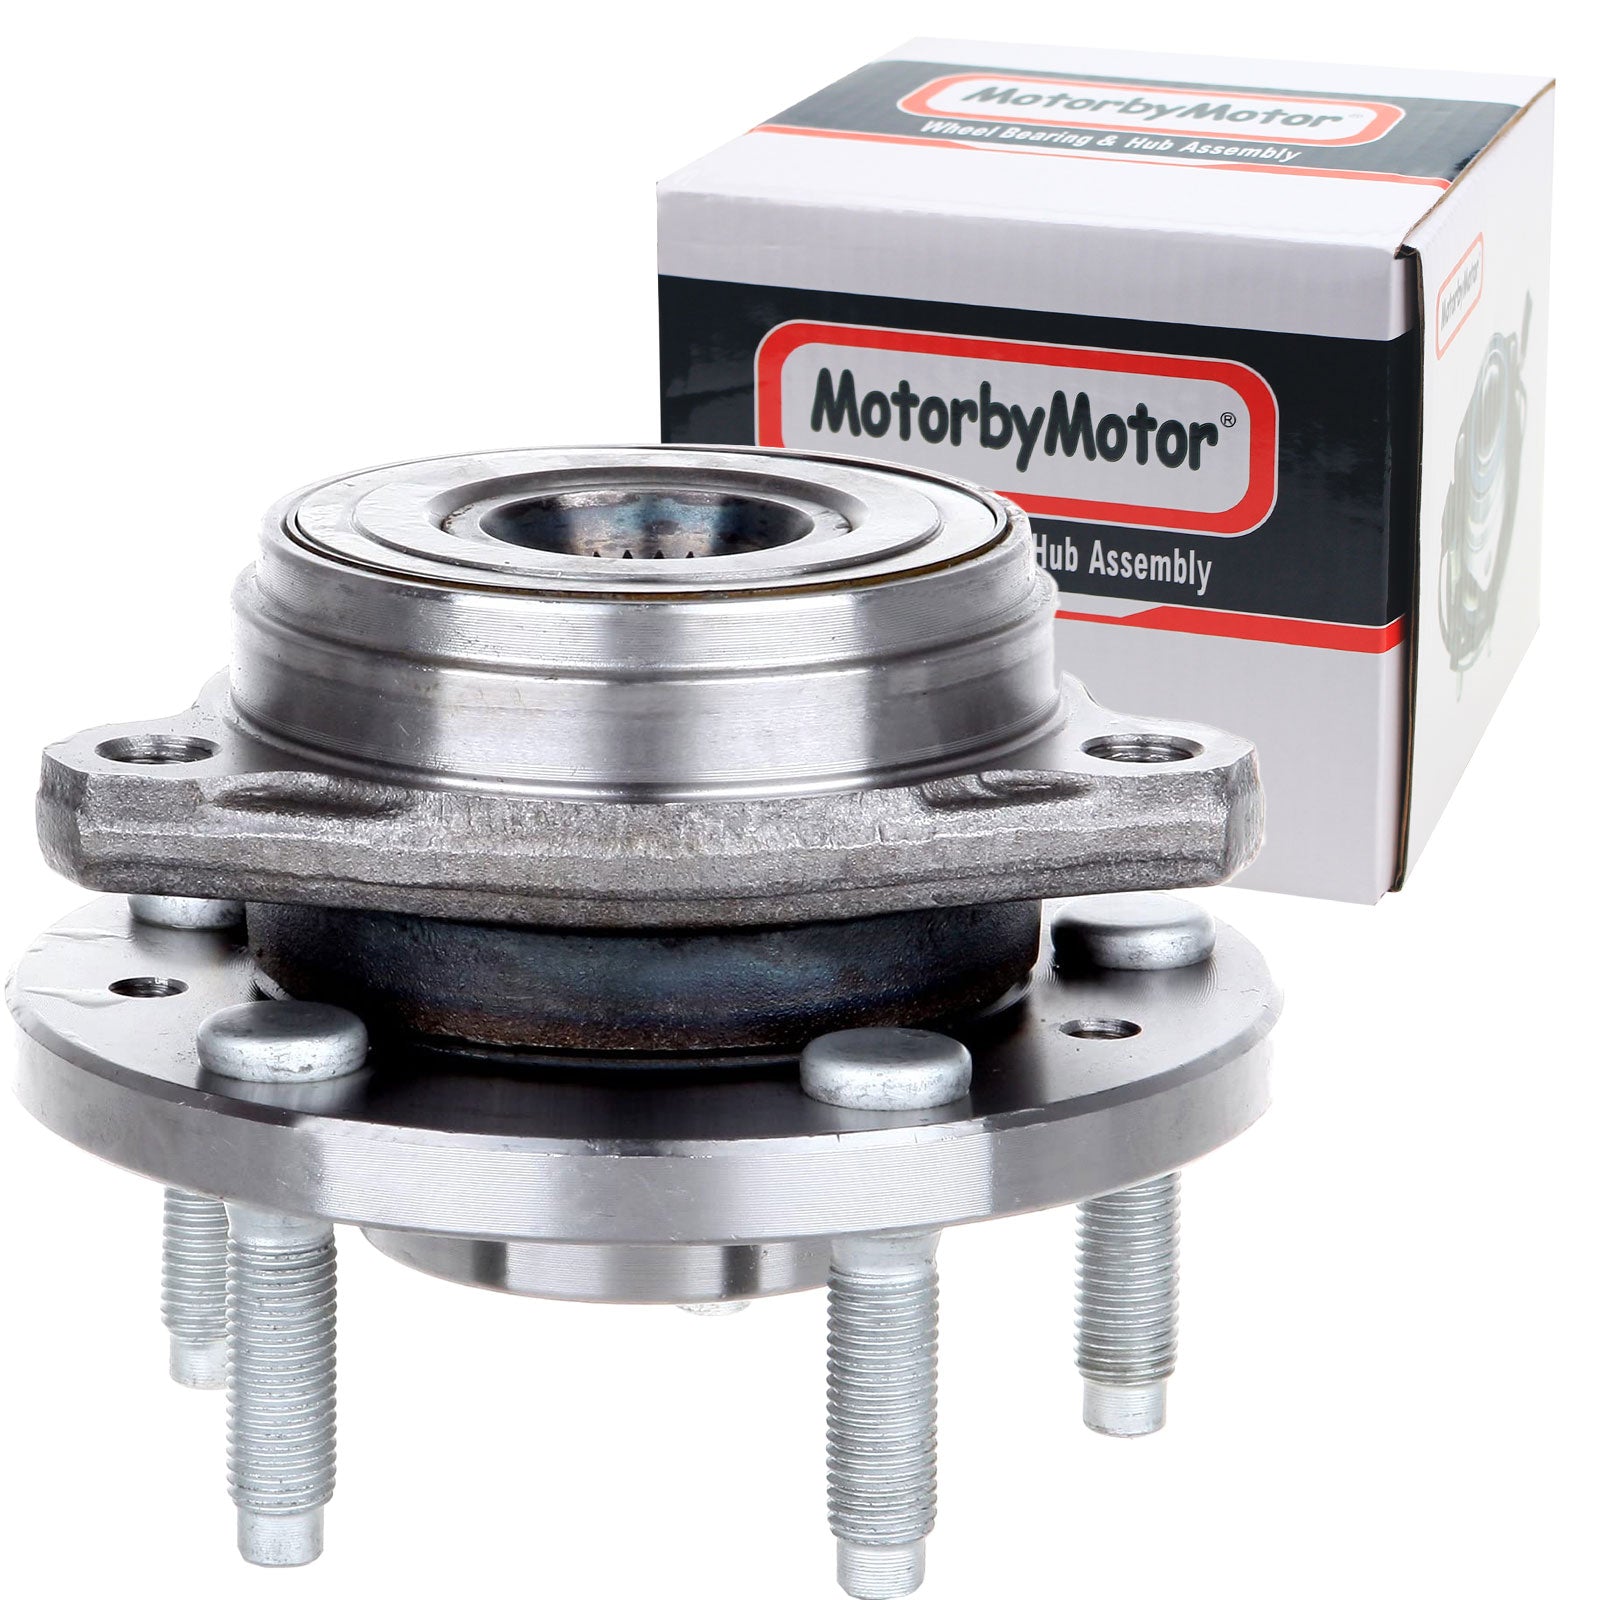 MotorbyMotor 513156 Front Wheel Bearing and Hub Assembly with 5 Lugs Fits for Ford Windstar 1999 thru 2003 Low-Runout OE Directly Replacement Hub Bearing MotorbyMotor